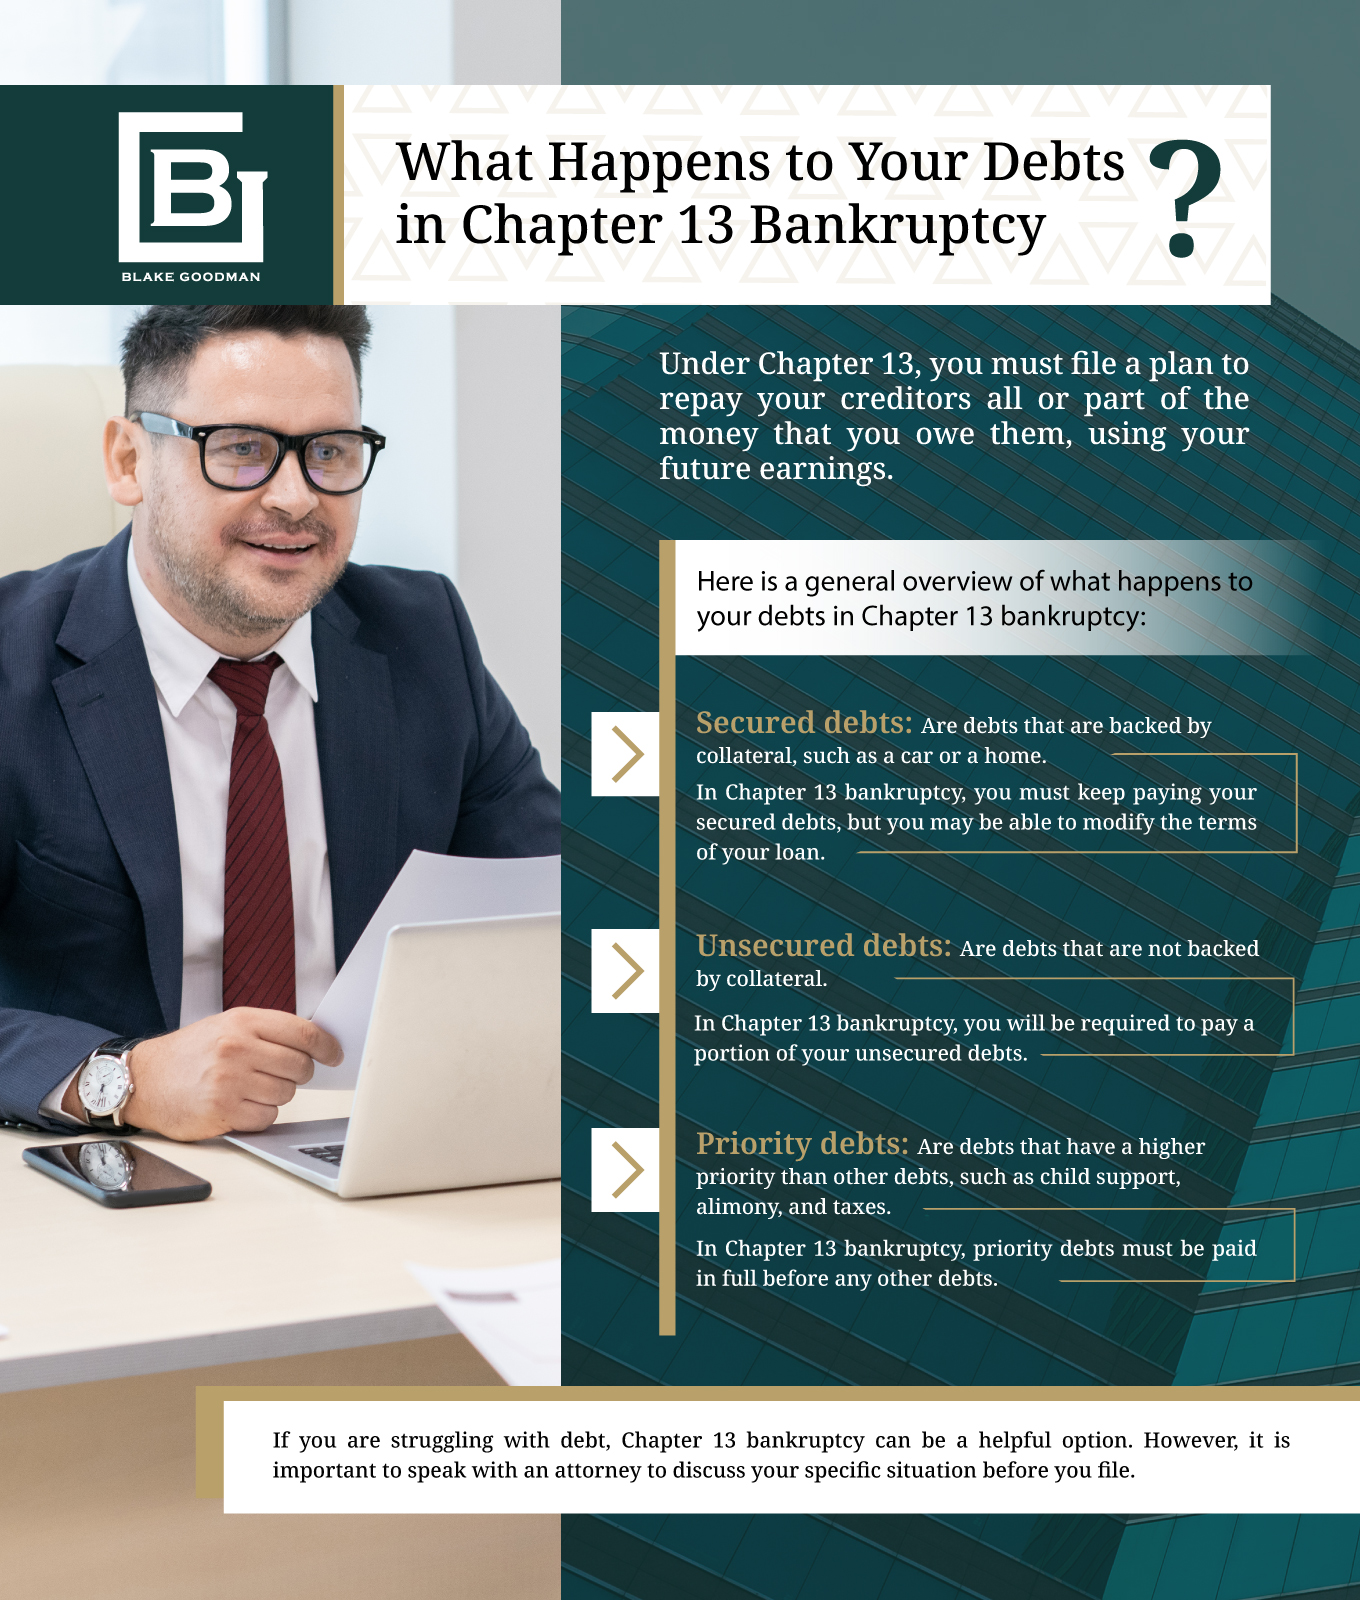 Infography that shows what happens to your debts in chapter 13 bankruptcy